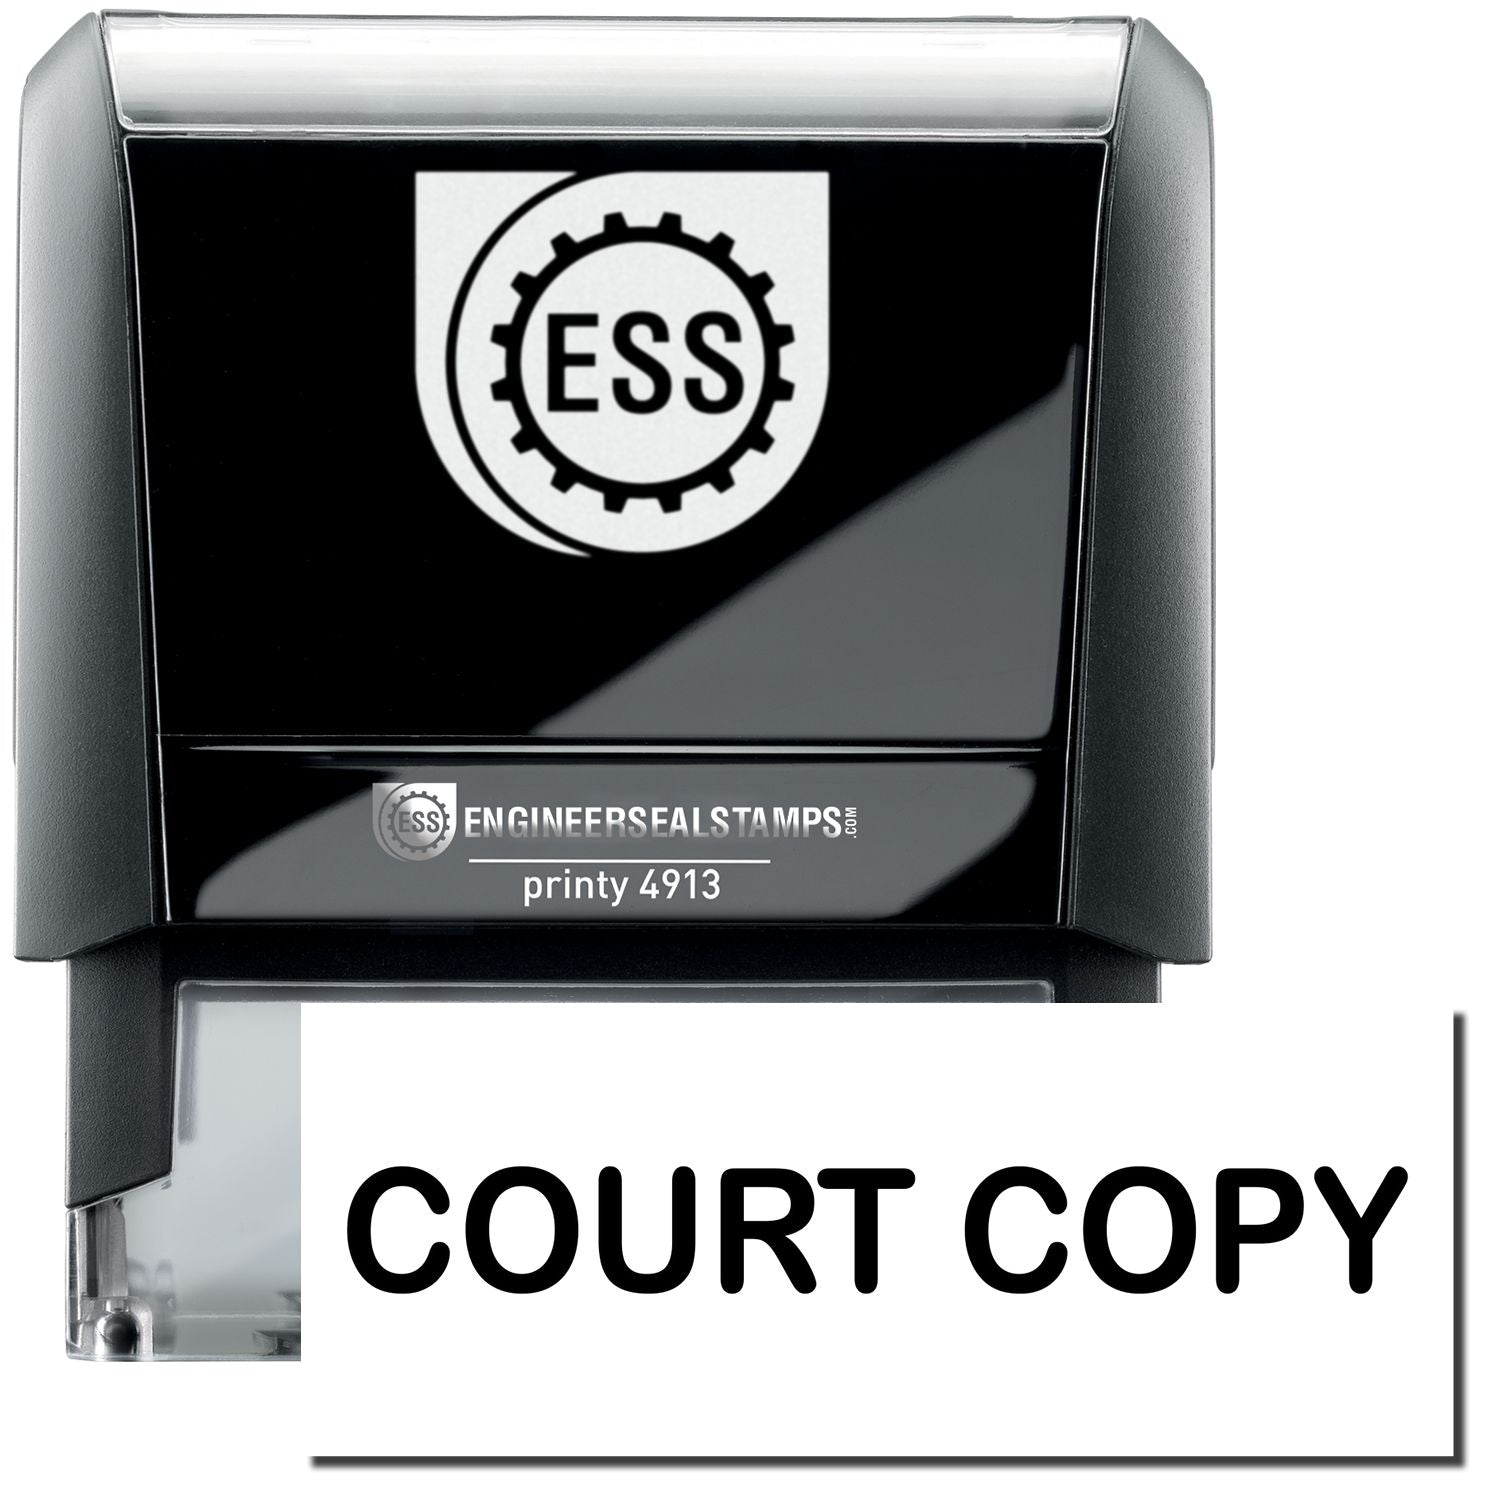 A self-inking stamp with a stamped image showing how the text "COURT COPY" in a large bold font is displayed by it.